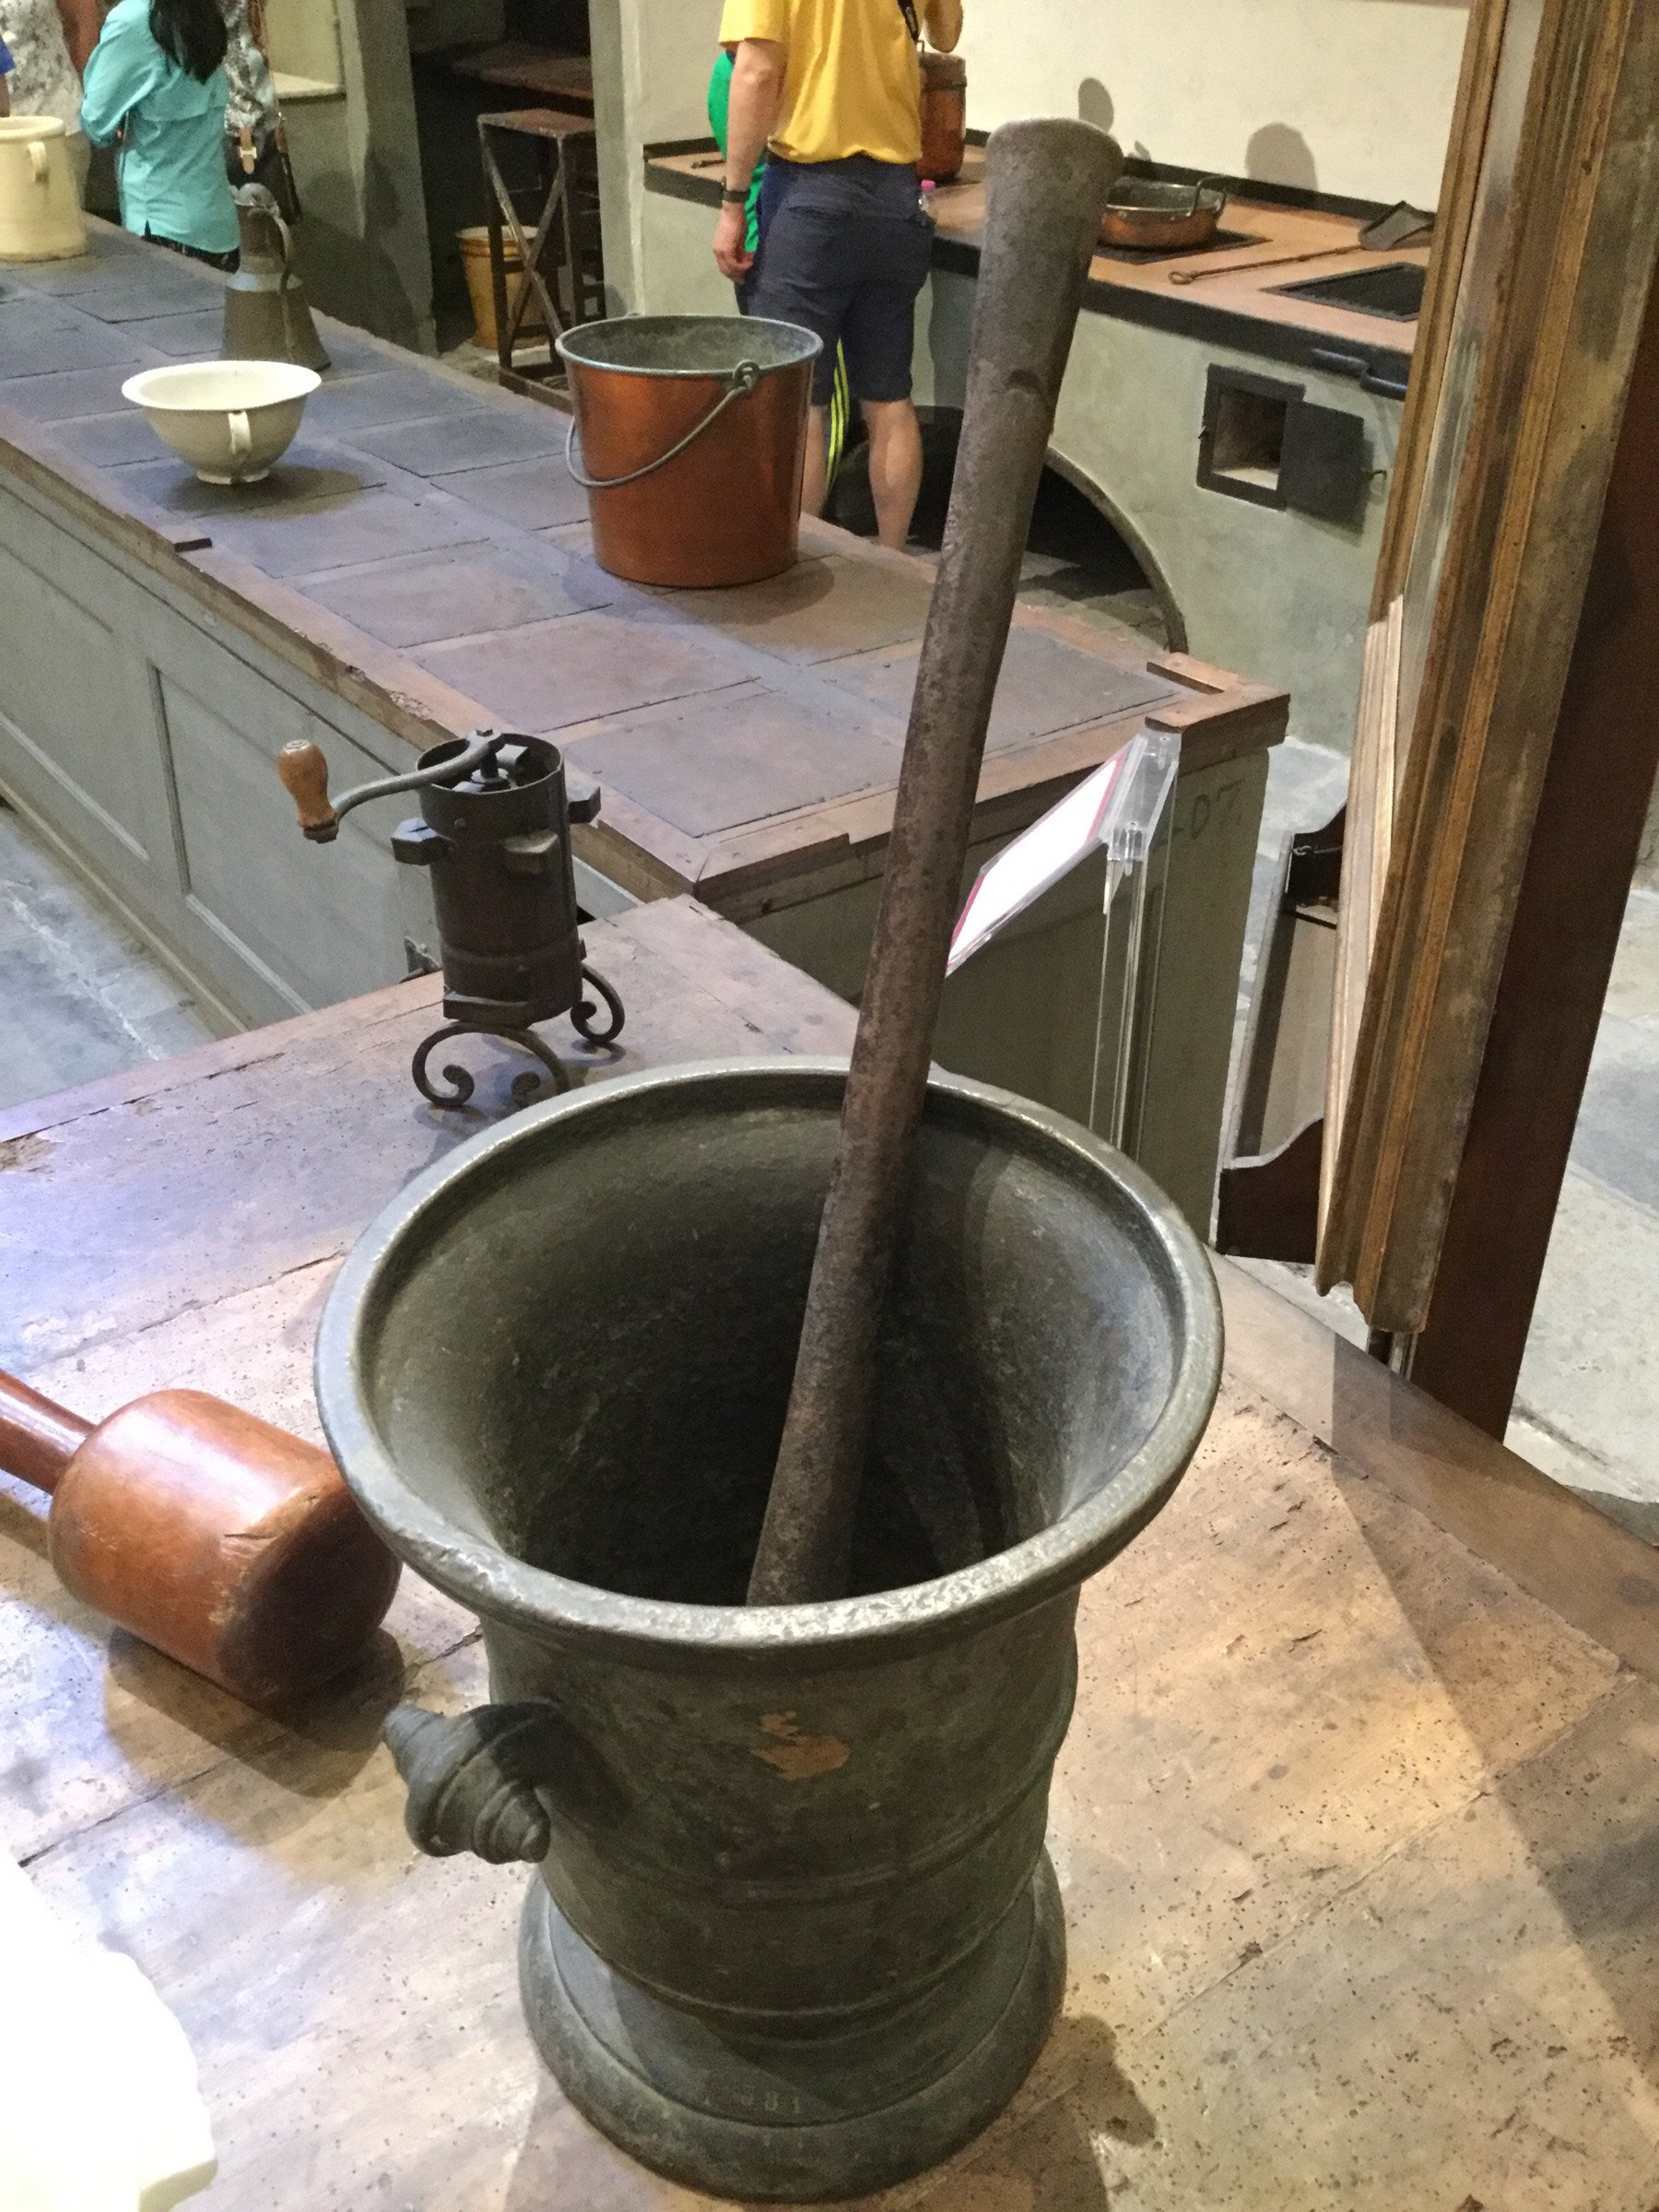 Giant mortar and pestle | Photo